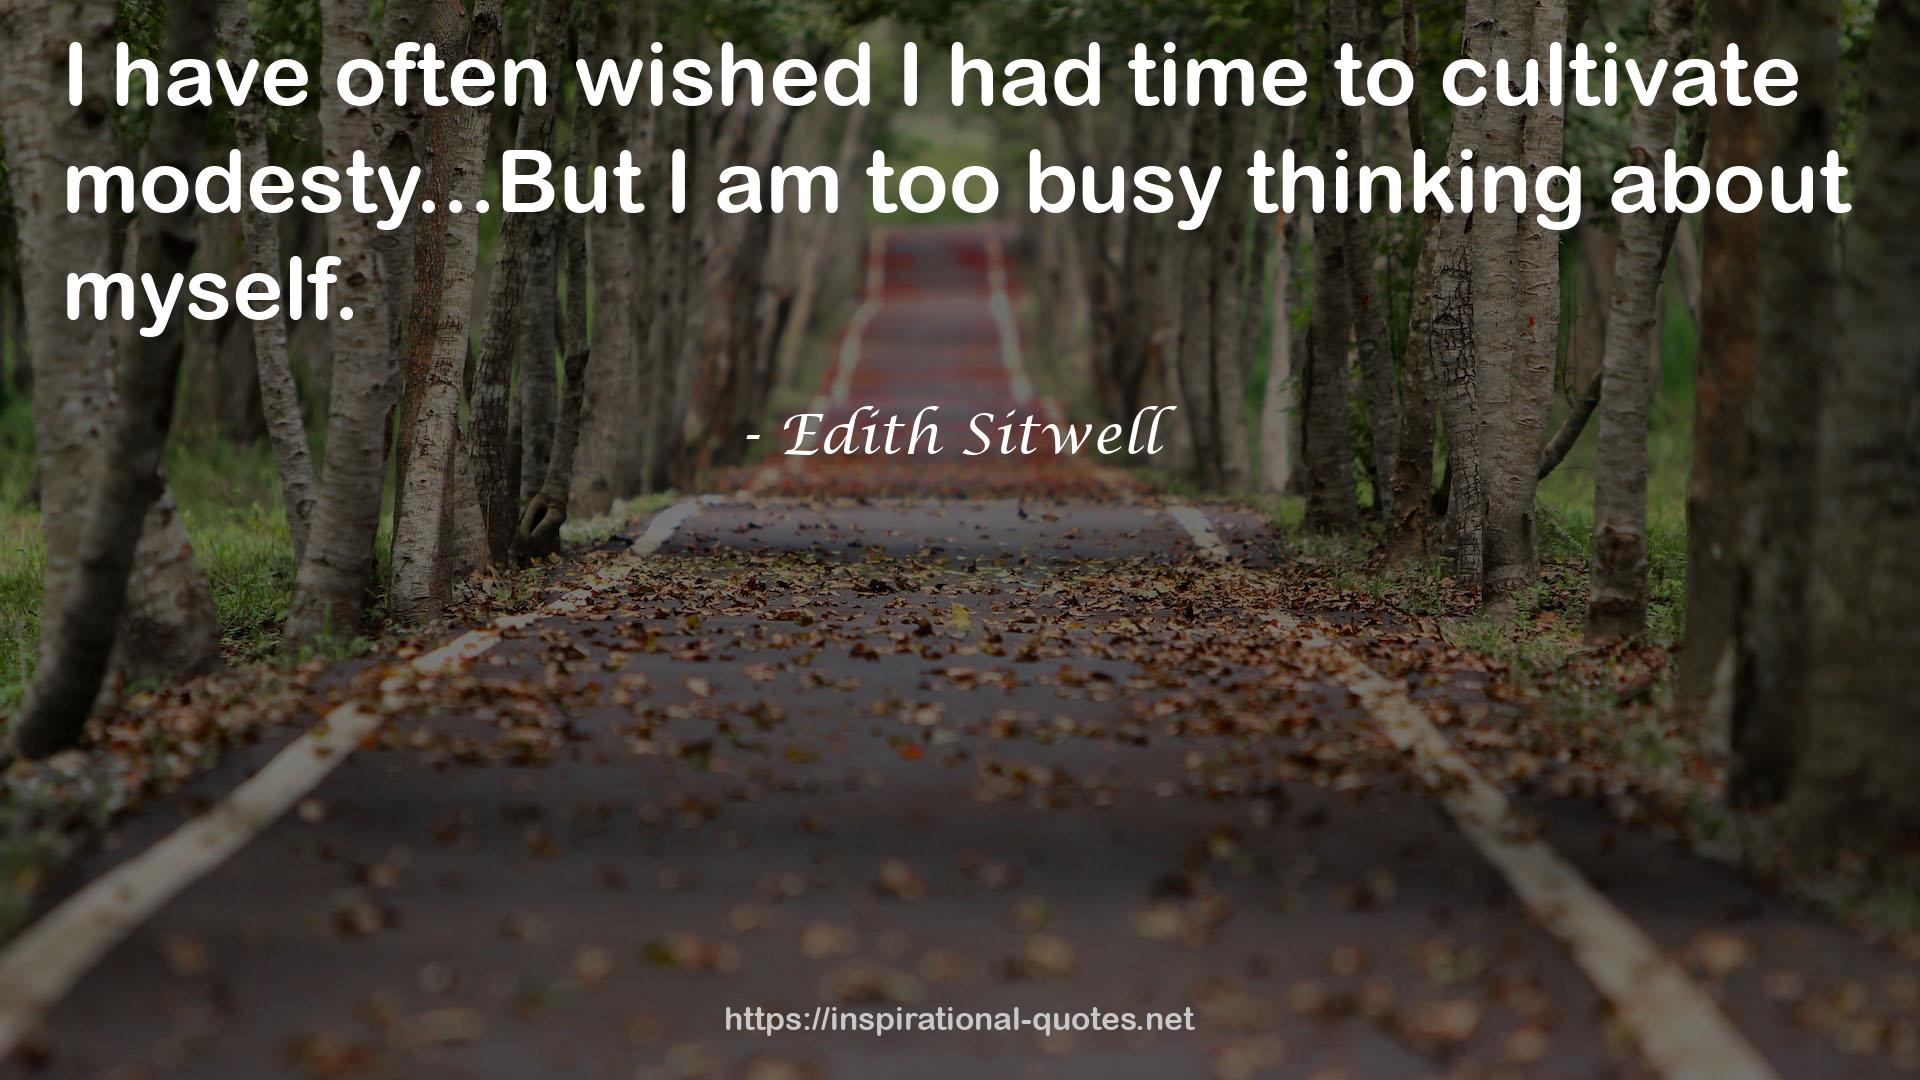 Edith Sitwell QUOTES